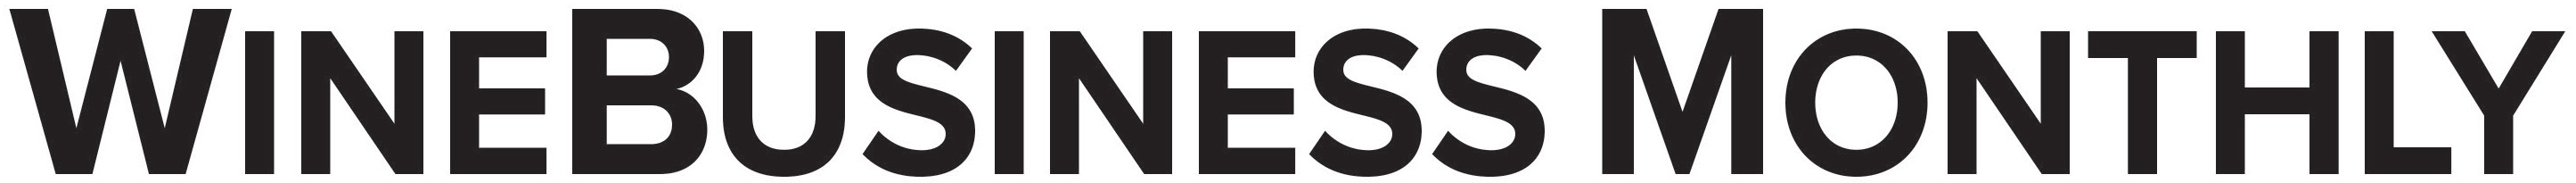 WineBusiness Monthly Logo